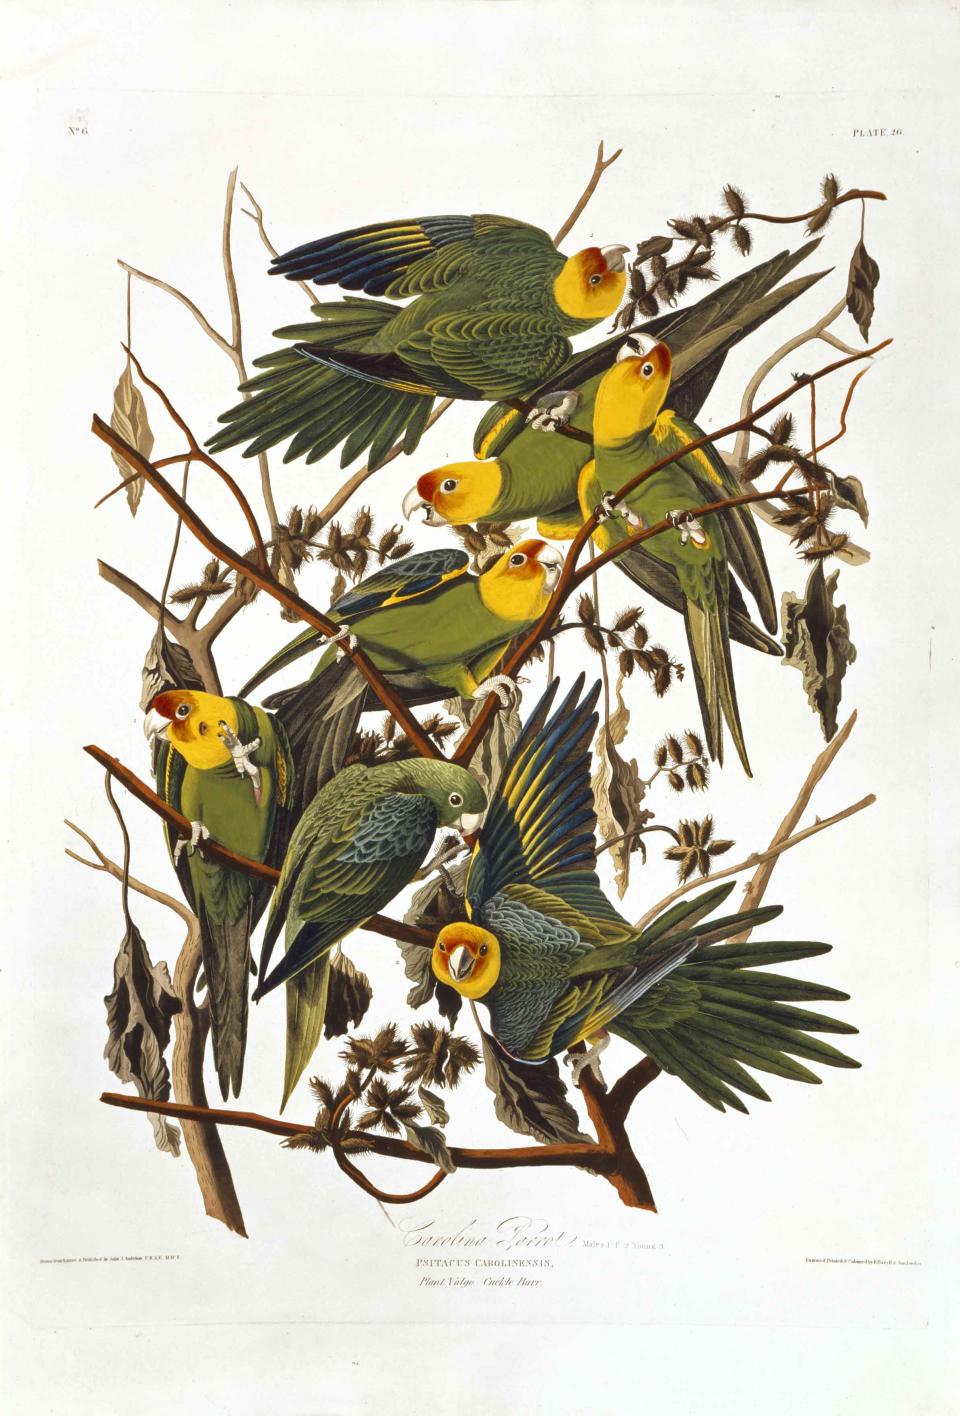 Audubon’s The Birds of America – the world’s most expensive book and one of the best-known natural history books ever produced. It was first published in double elephant folio size between 1827 and 1838 and is famous for its stunning life-size illustrations of birds. (Natural History Museum)